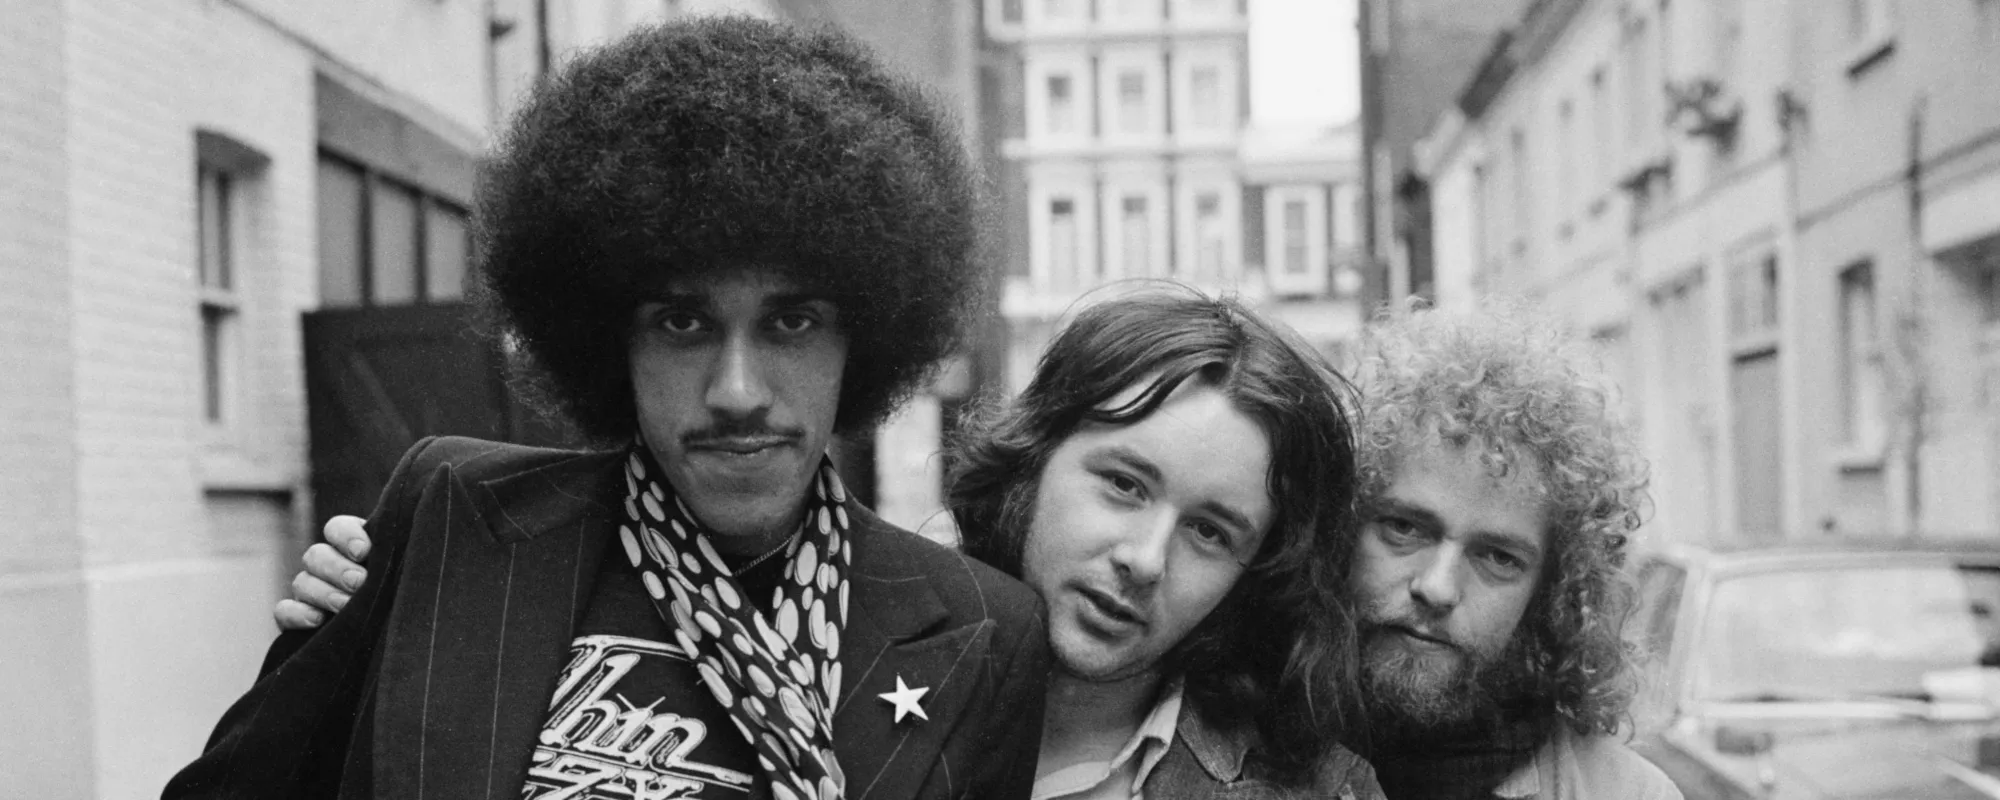 Producer Tony Visconti Opens Up About His Fears Surrounding Phil Lynott’s Drug Use